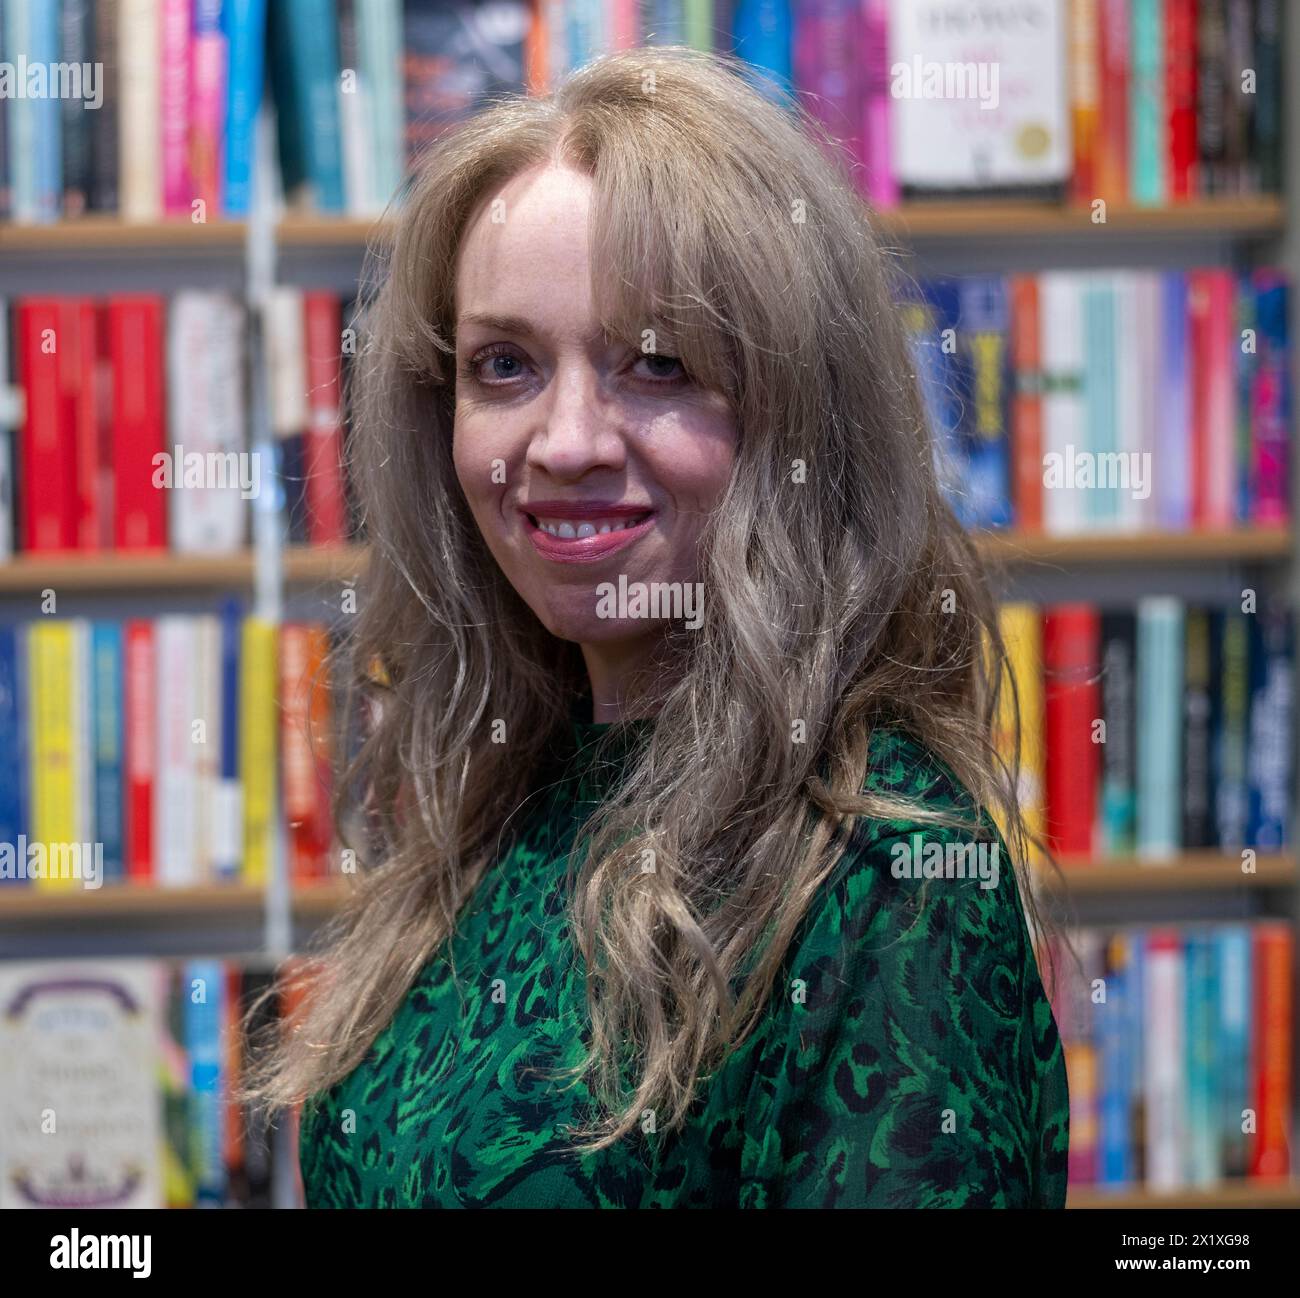 Brentwood Essex 16 Apr 2024 Erin Kelly, author of The Skeleton Key and her new book The House of Mirrors at a book signing at Waterstones Brentwood Essex UK Credit: Ian Davidson/Alamy Live News Stock Photo